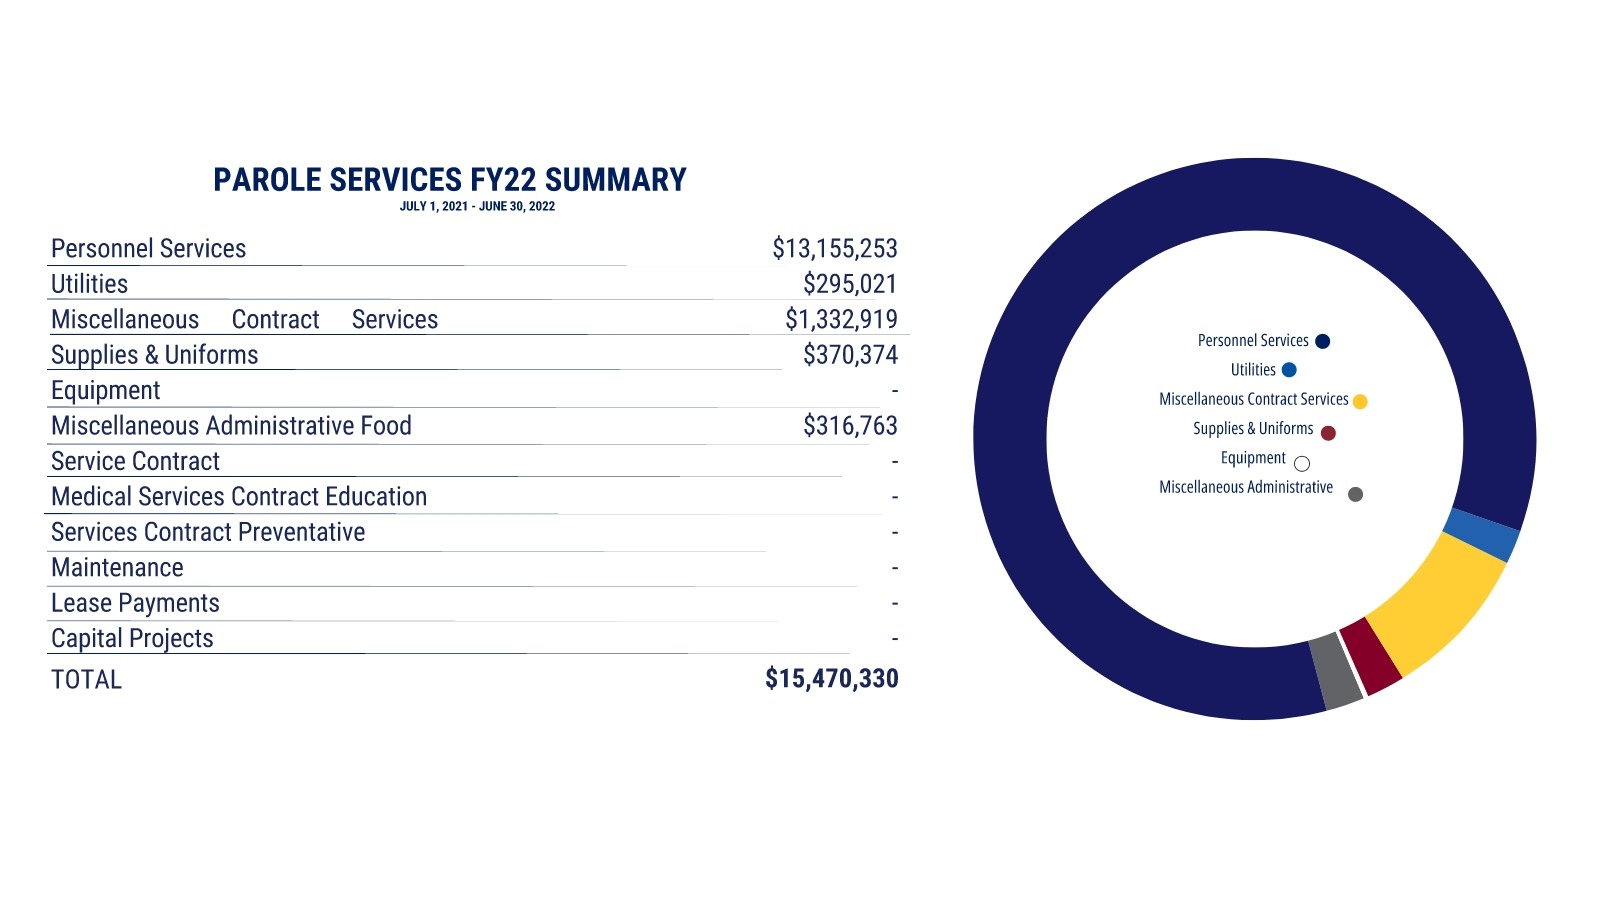 Between Personnel Services - $13,155253, Utilities - $295,021, Miscellaneous Contract Services - $1,332,919, Supplies & Uniforms - $316,763, Equipment - None, Miscellaneous Administrative - $316,763, Food Service Contract - None, Medical Services Contract - None, Education Services Contract - None, Preventative Maintenance - None , Lease Payments - None, and Capital Projects- None, the Division's total expenses for 2022 was $15,470,330 for Parole Services